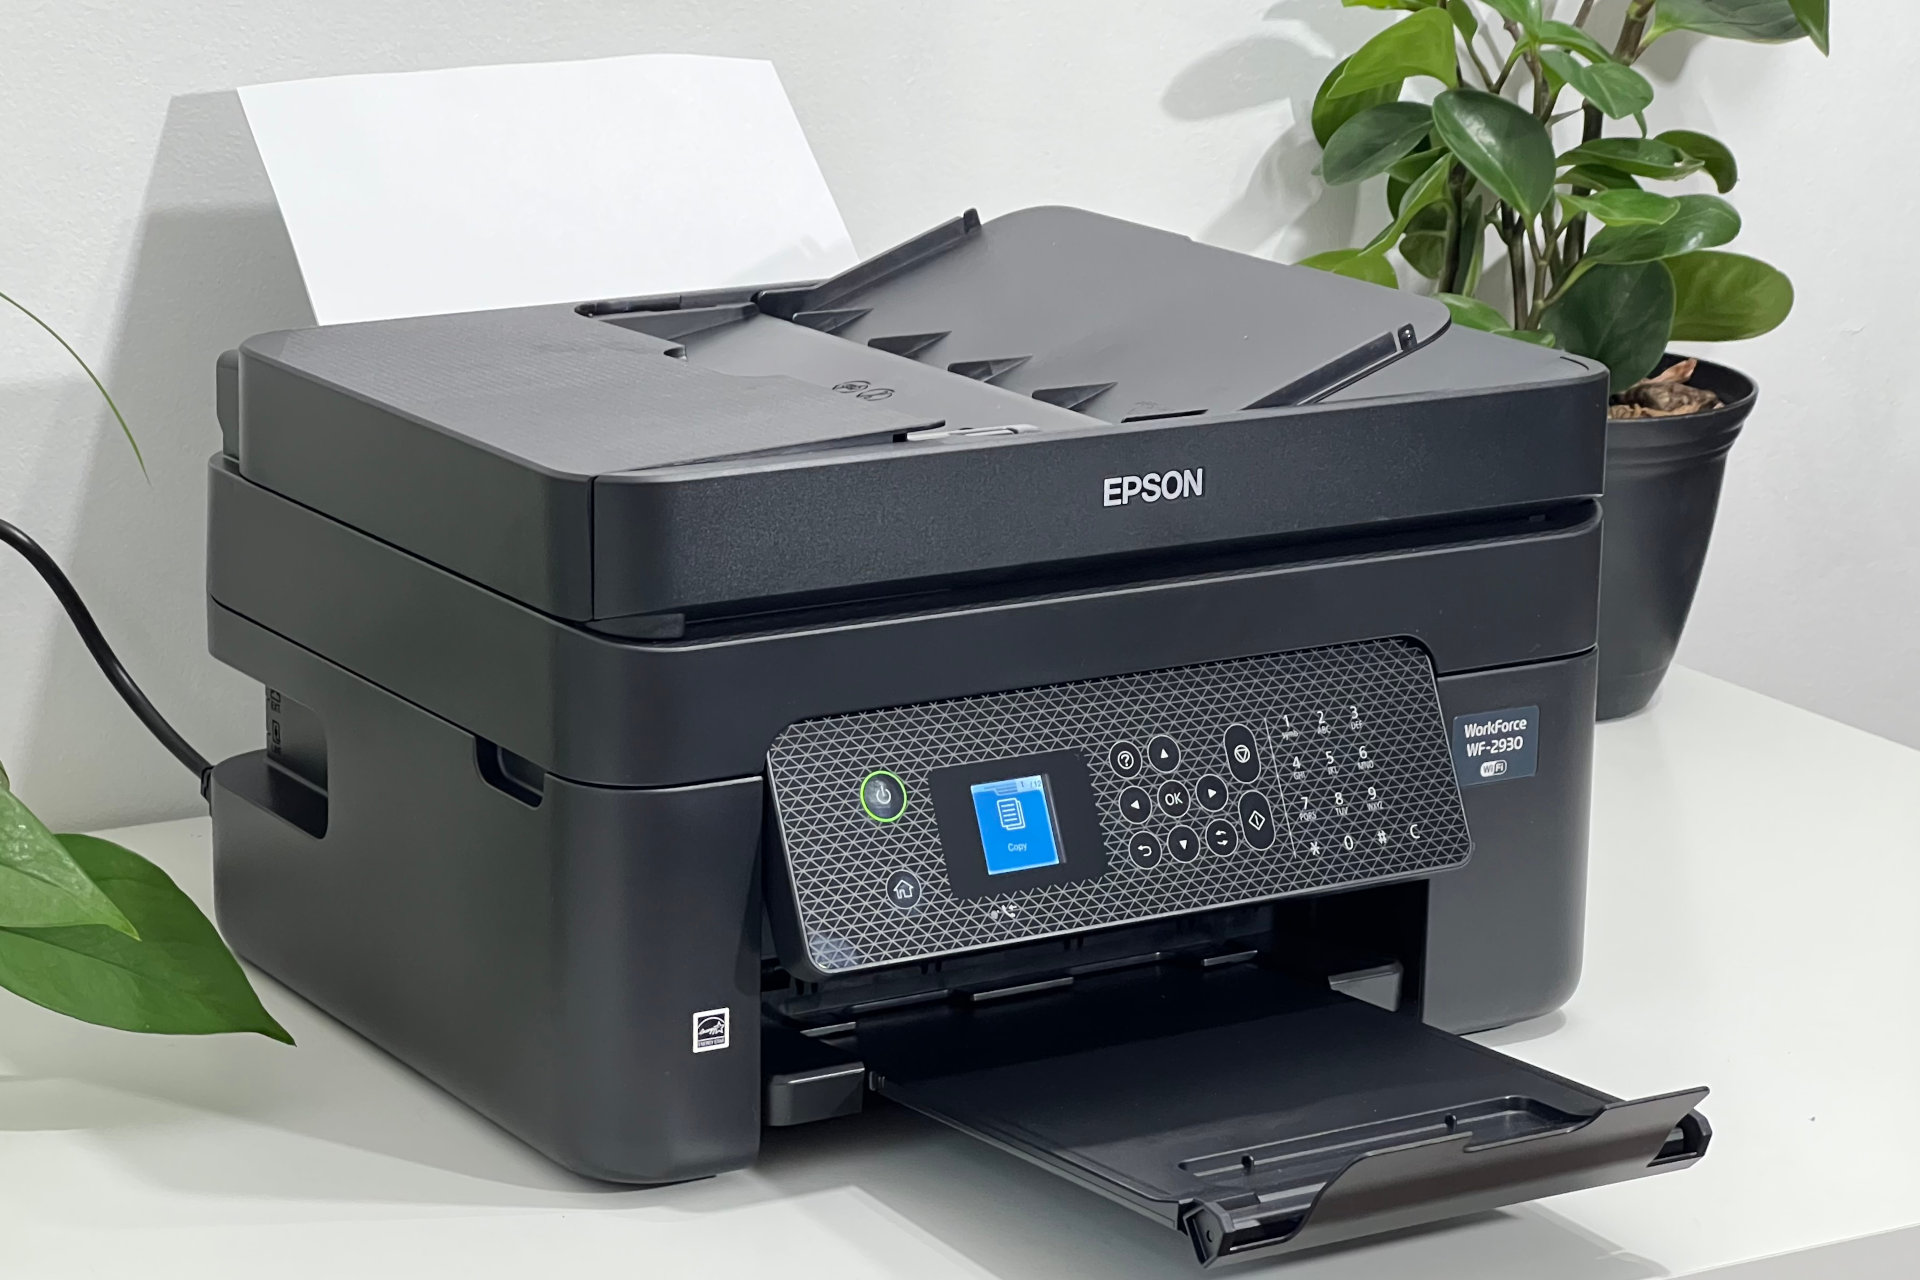 Epson WorkForce WF-2930 is a low-cost, compact all-in-one printer.